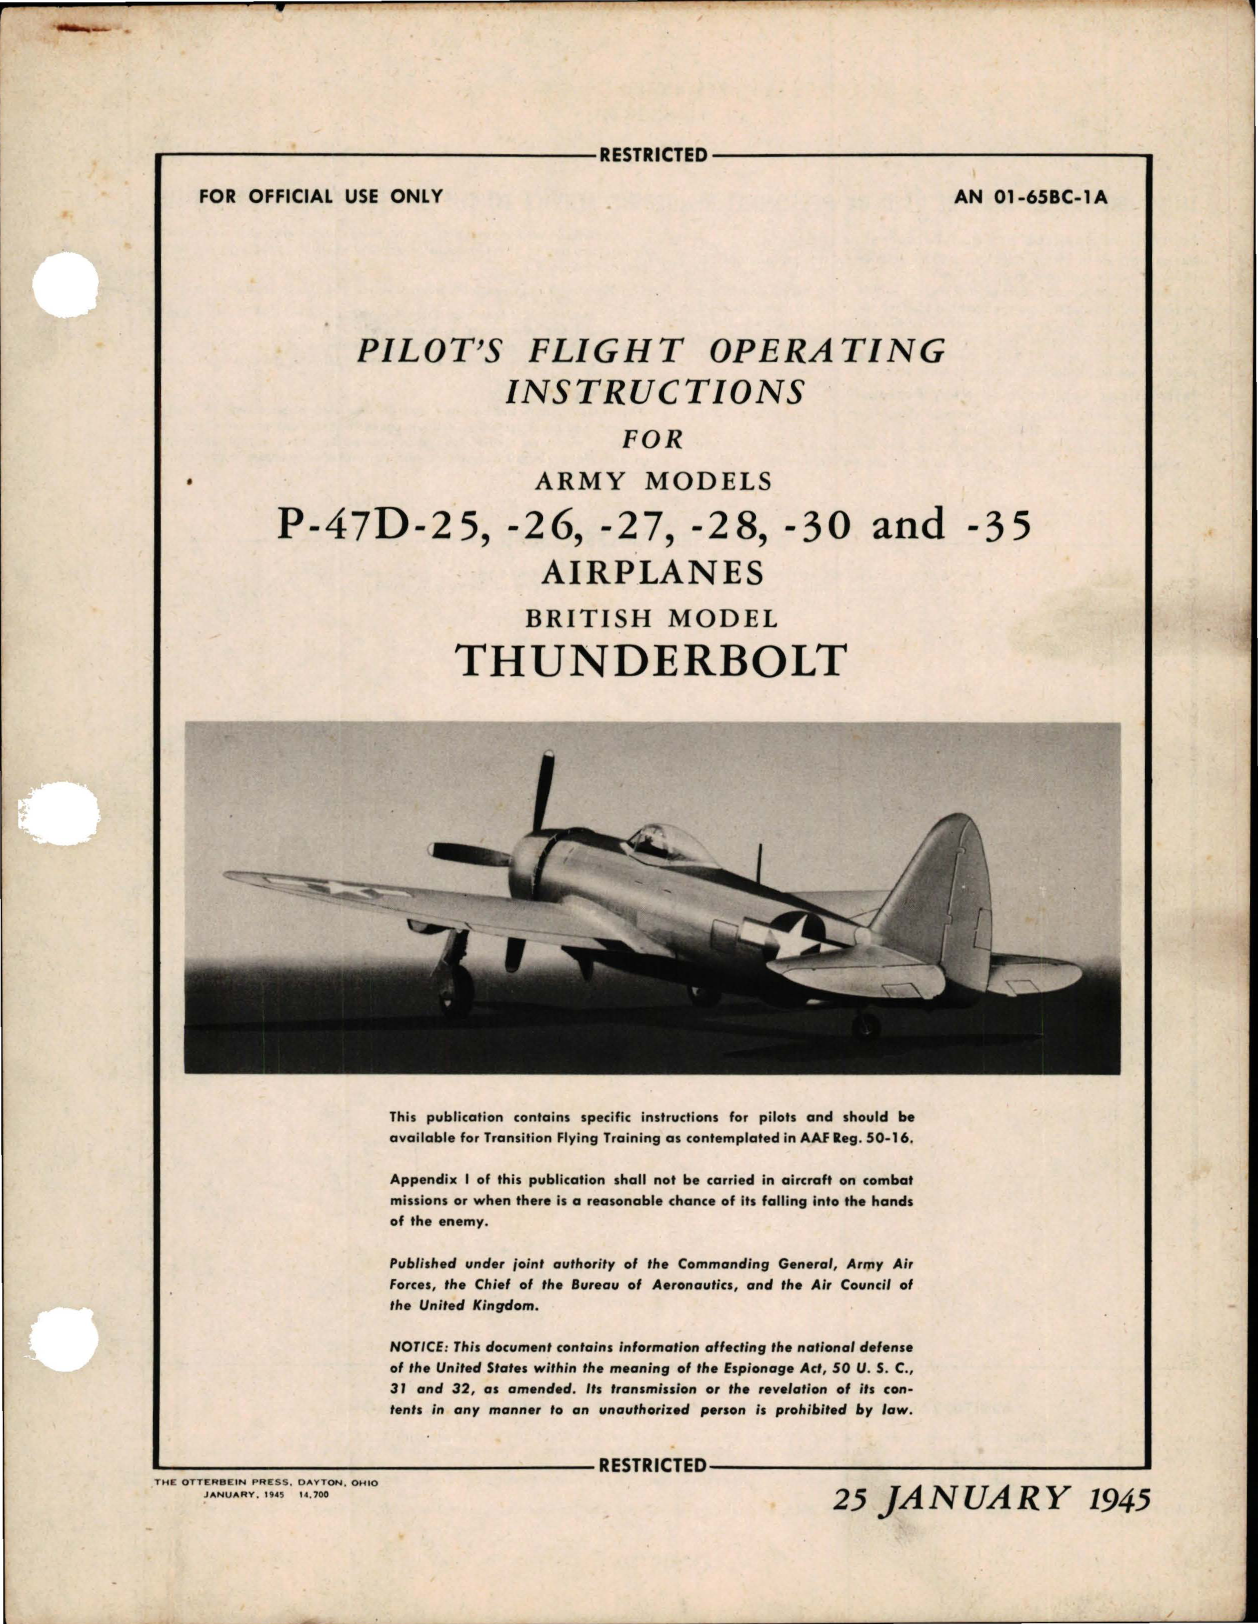 Sample page 1 from AirCorps Library document: Pilot's Flight Operating Instructions for P-47D-25, P-47D-26, P-47D-27, P-47D-28, P-47D-30 and P-47D-35